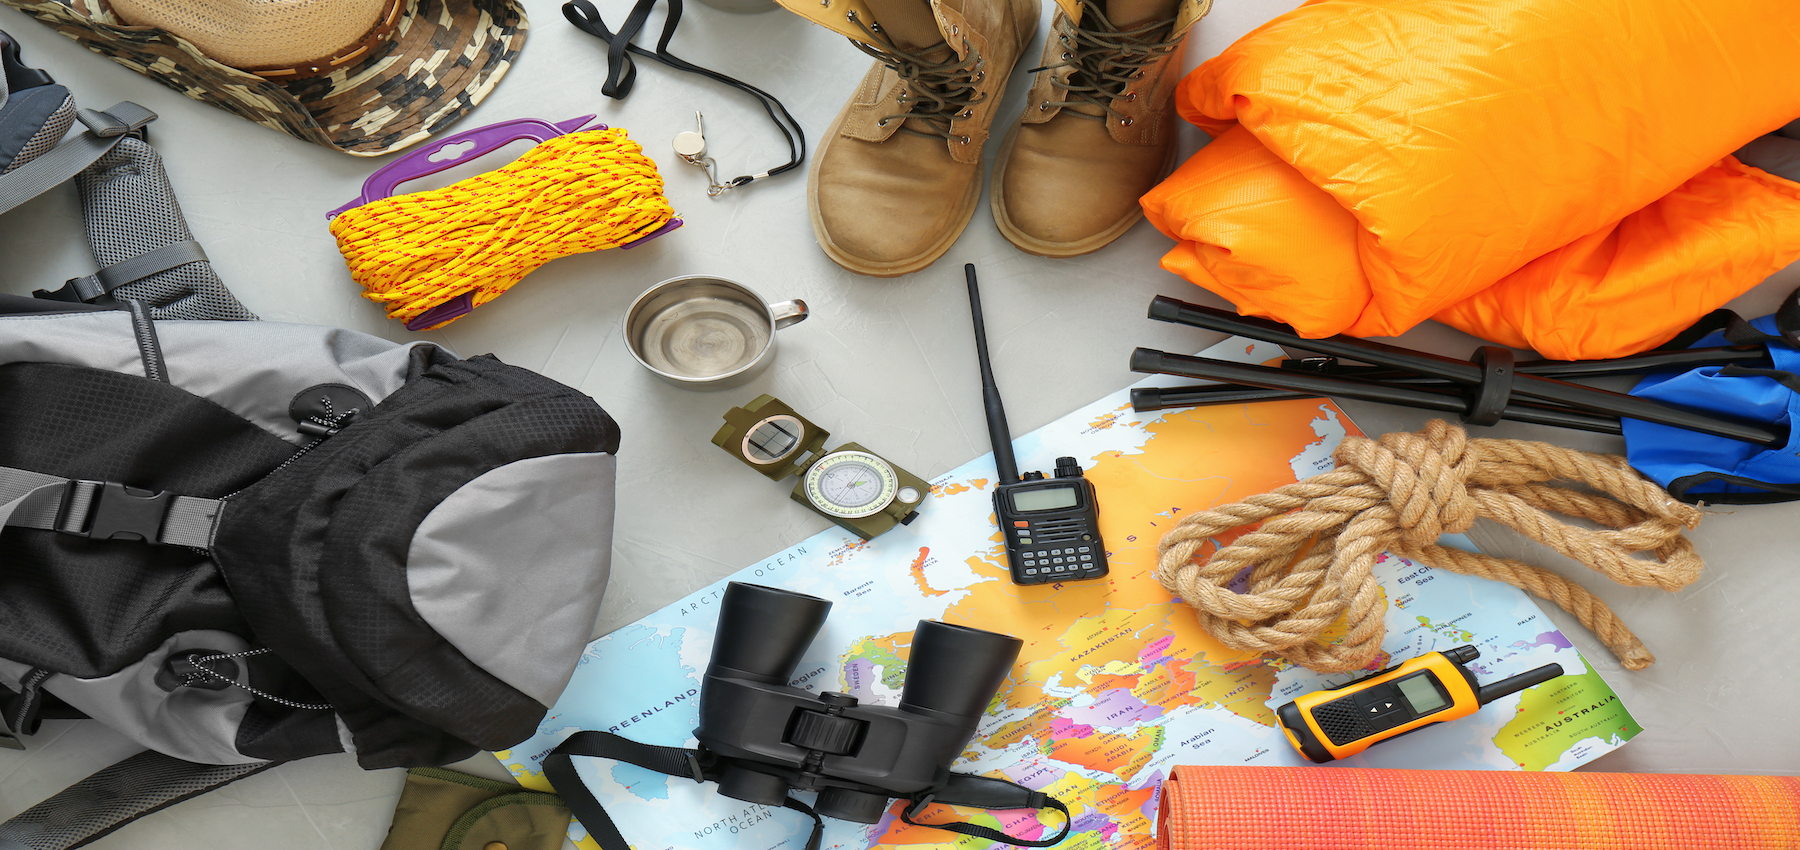 32 must have prepper gear items Survival Life. 